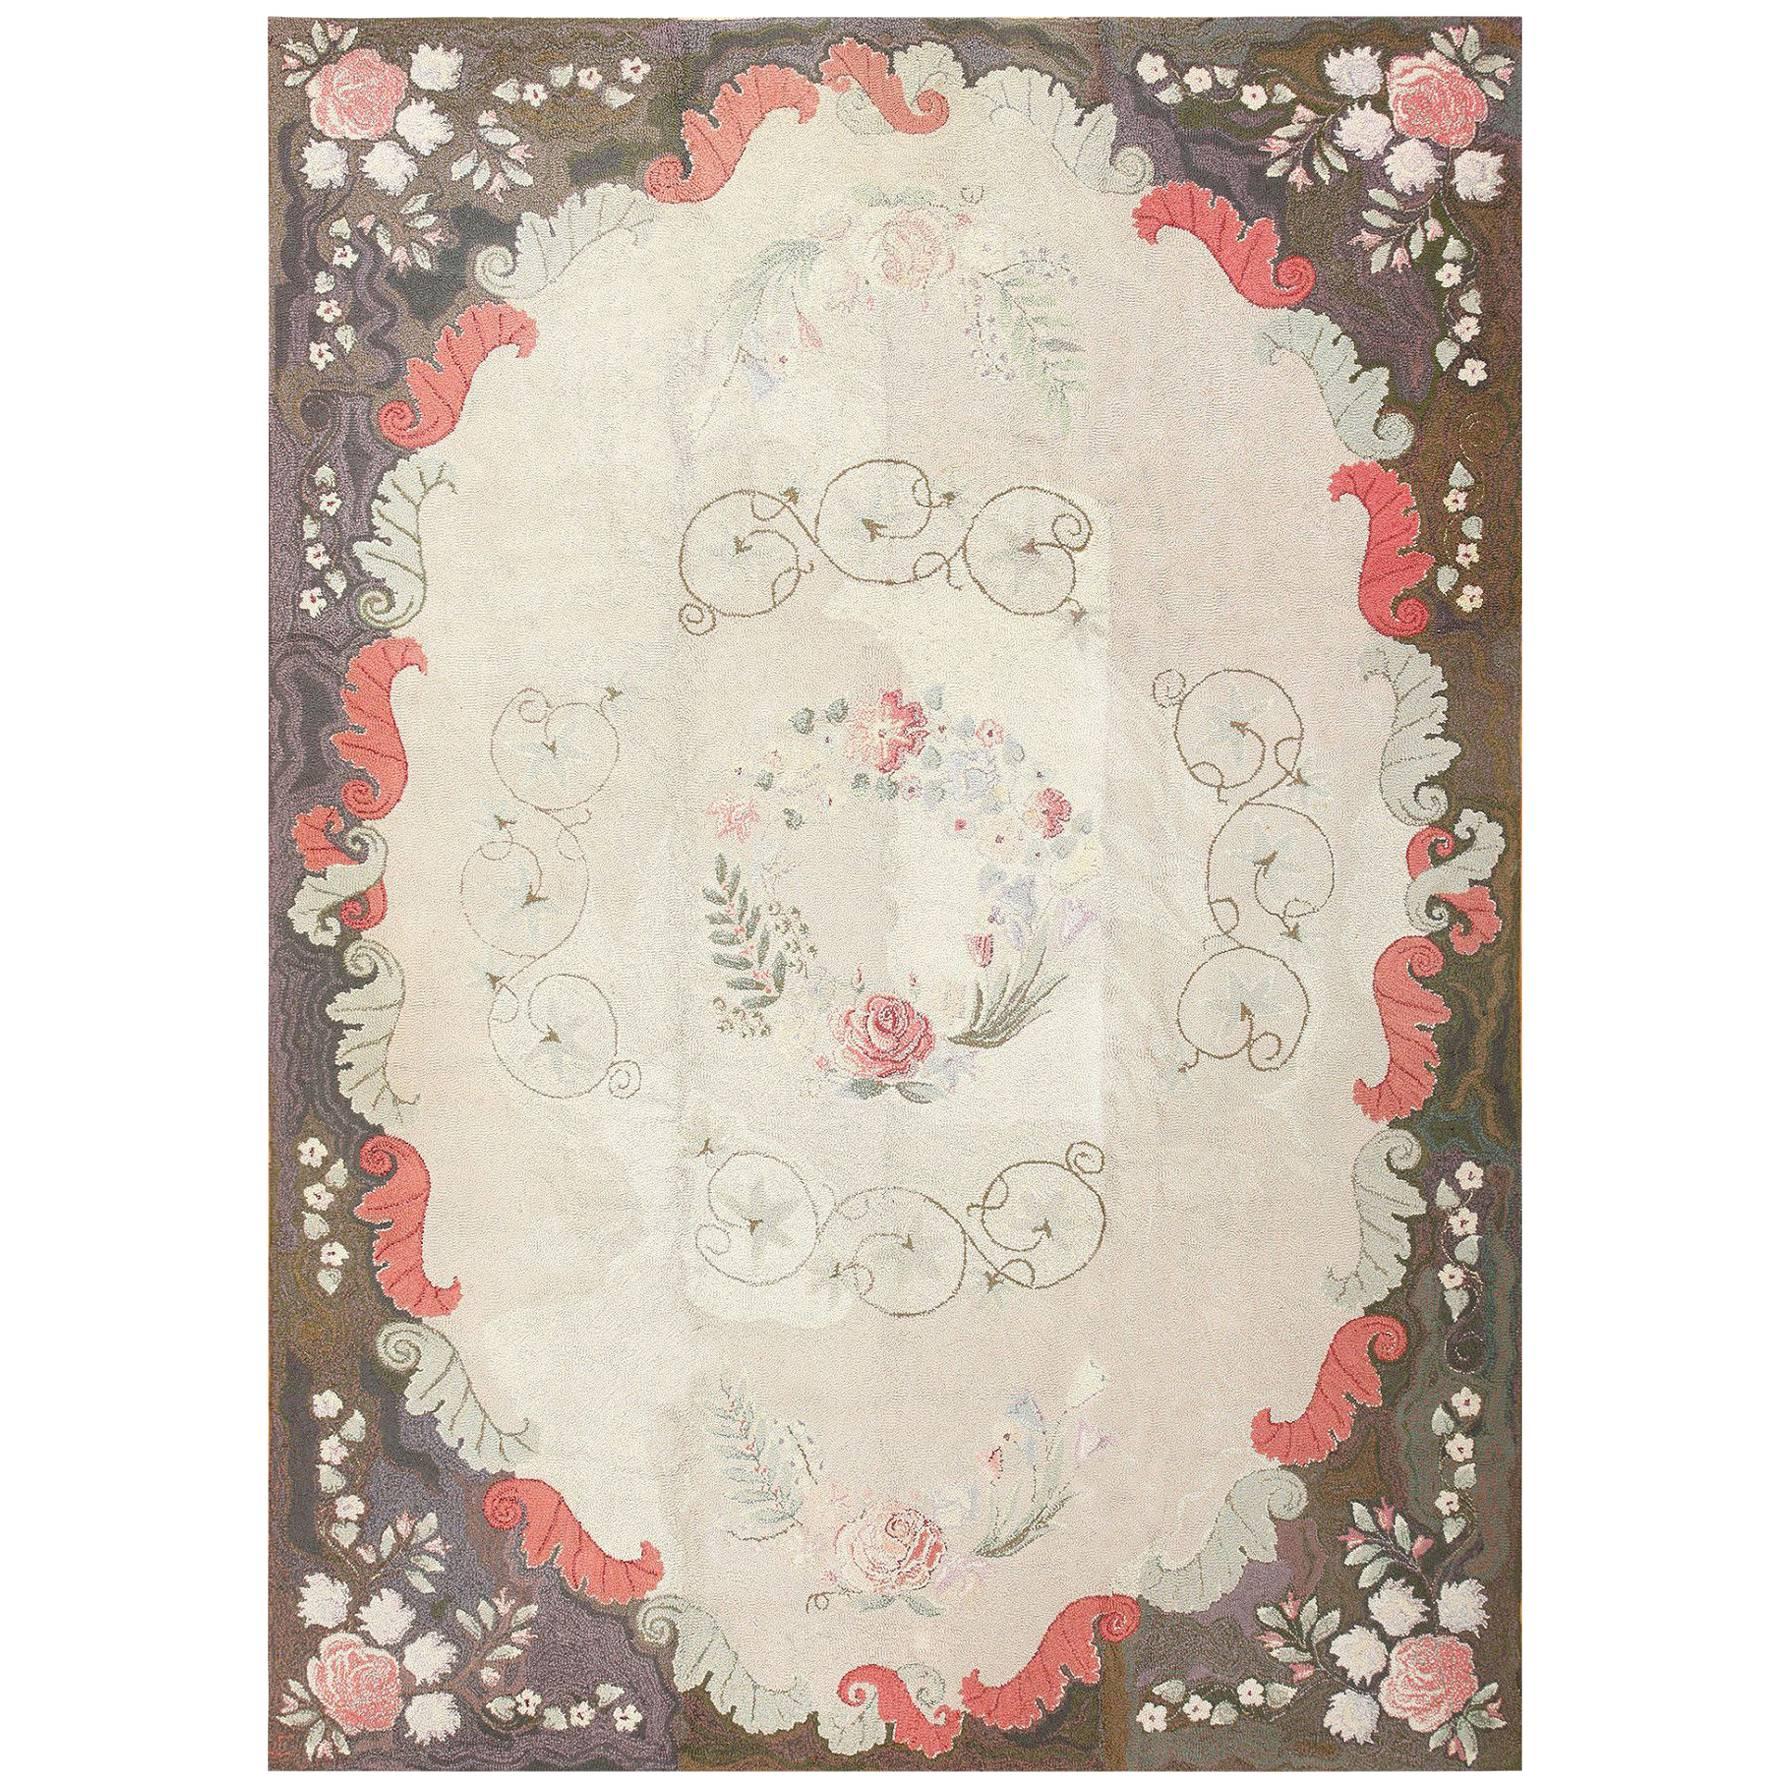 Nazmiyal Collection Antique American Hooked Rug. Size: 9 ft 4 in x 13 ft 2 in